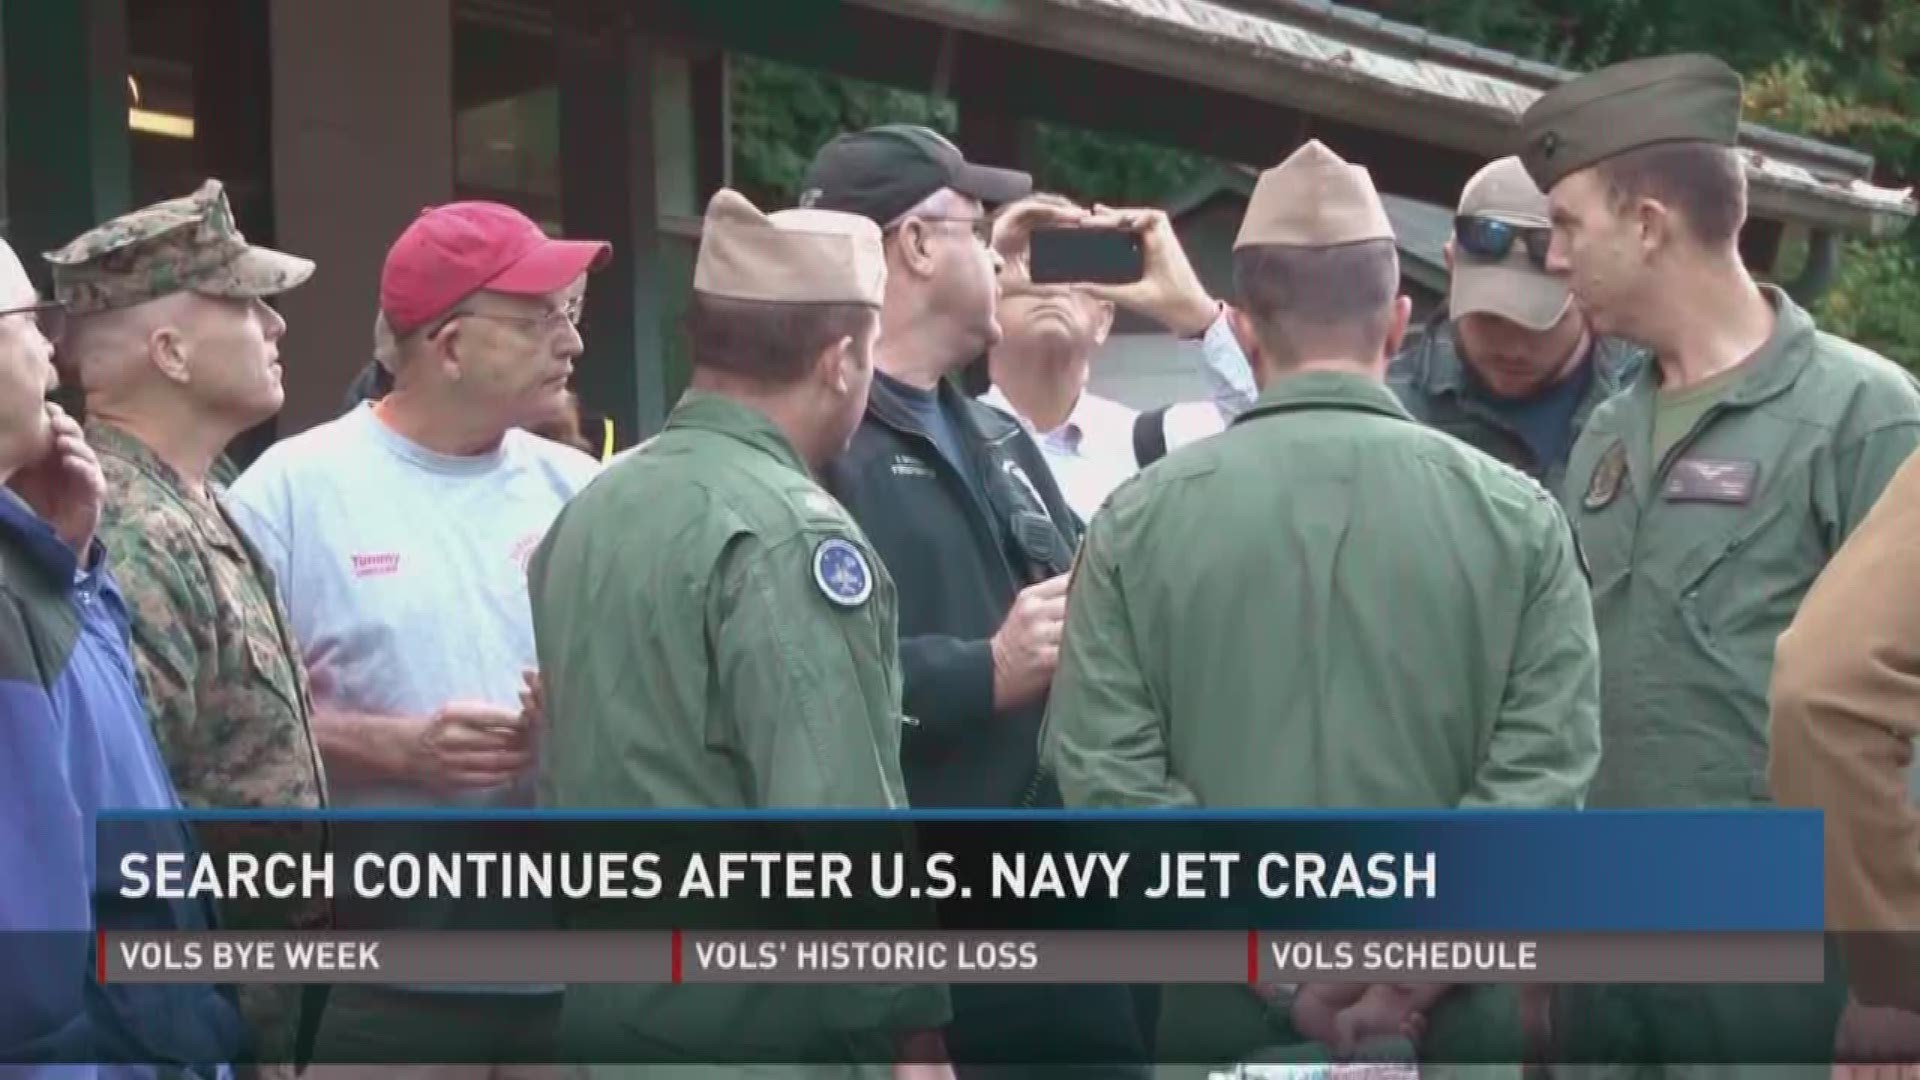 The U.S. Navy confirmed Monday the  2 pilots did not survive plane crash in Tennessee Sunday.